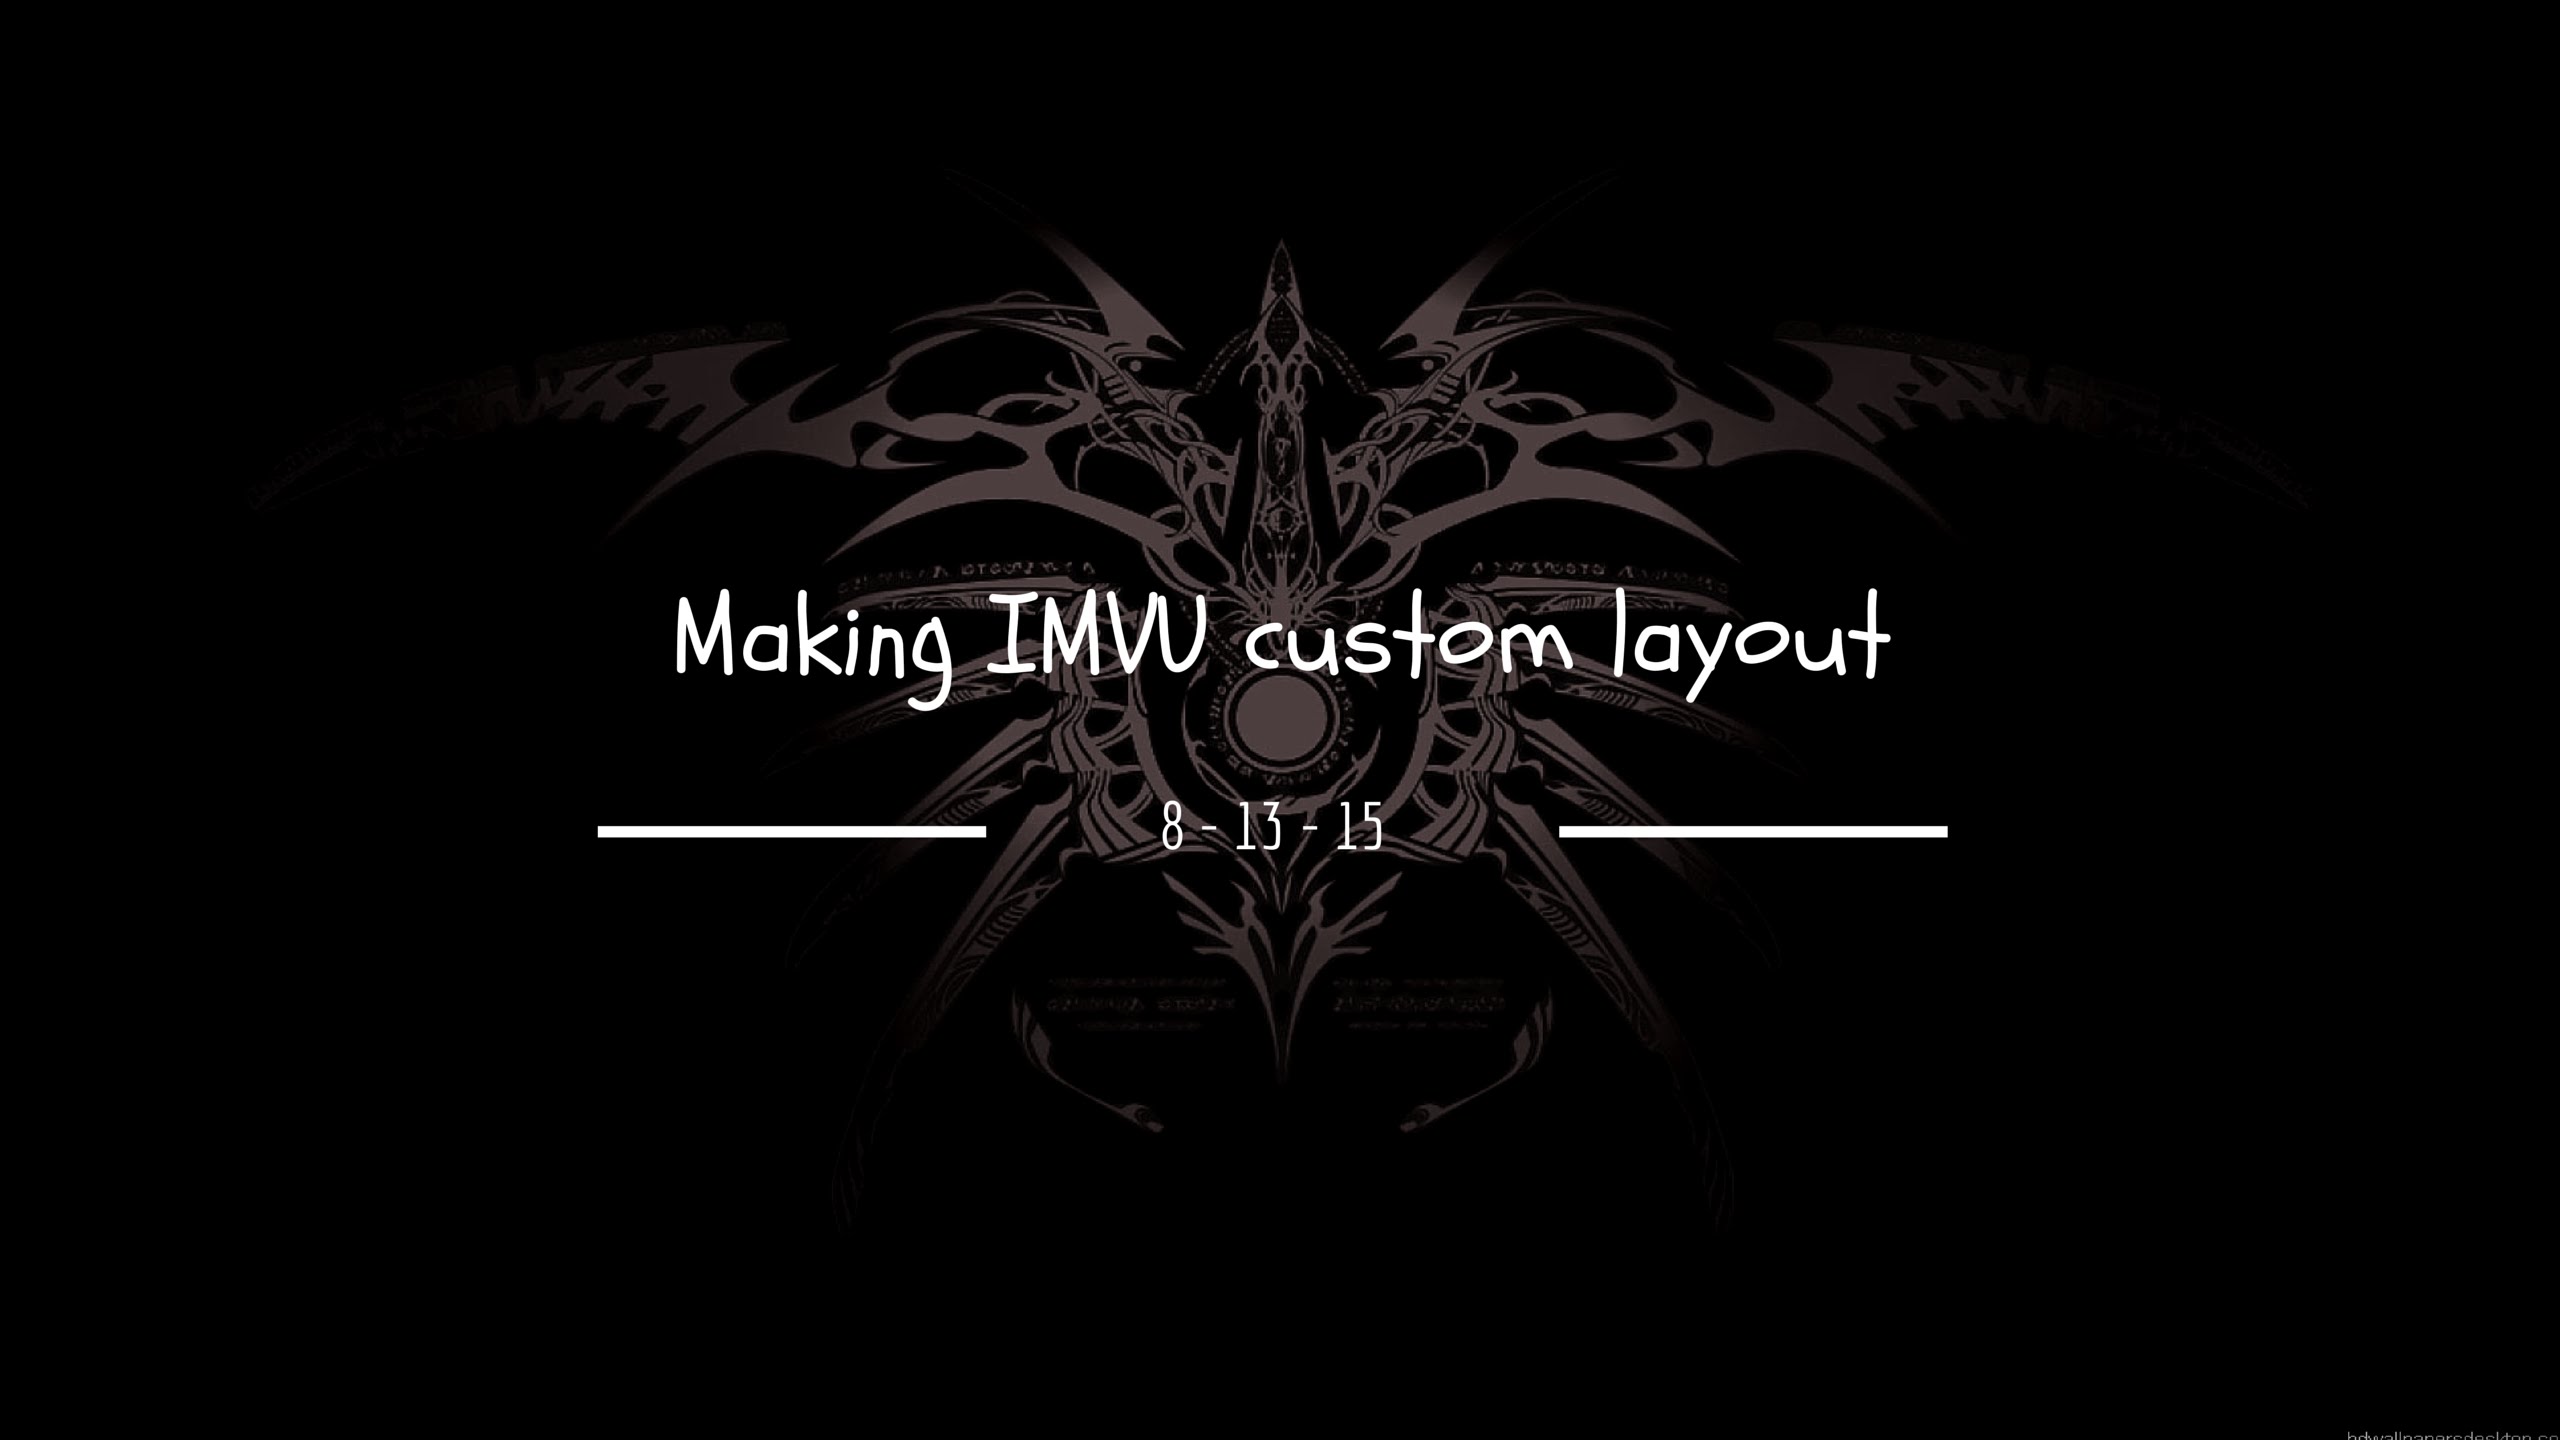 How To Make Imvu Layout With Photoshop Beginners